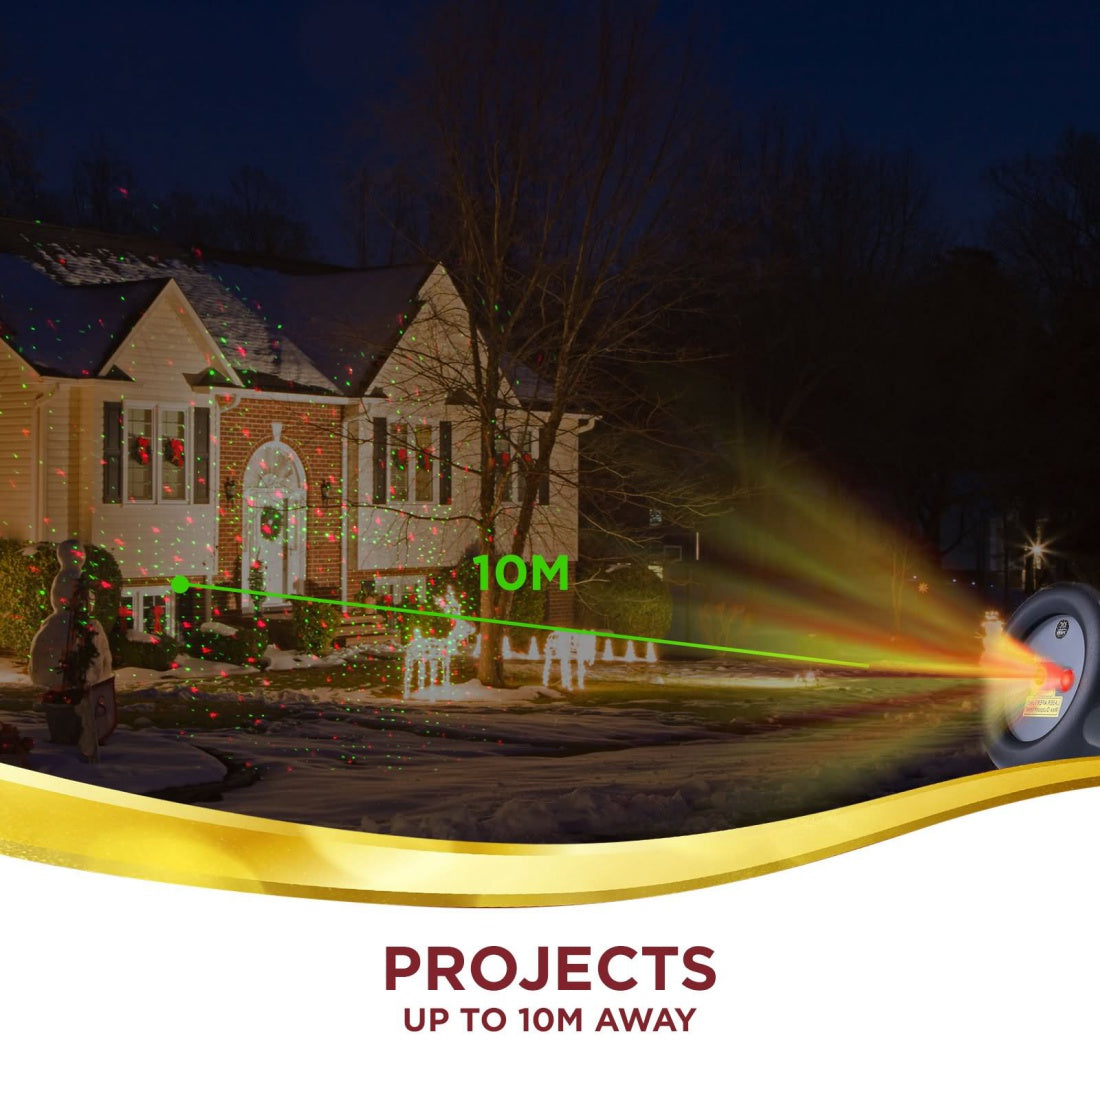 CLEARANCE Laser Light Projector Red Green Dots Flashing Garden Outdoor Christmas Decor